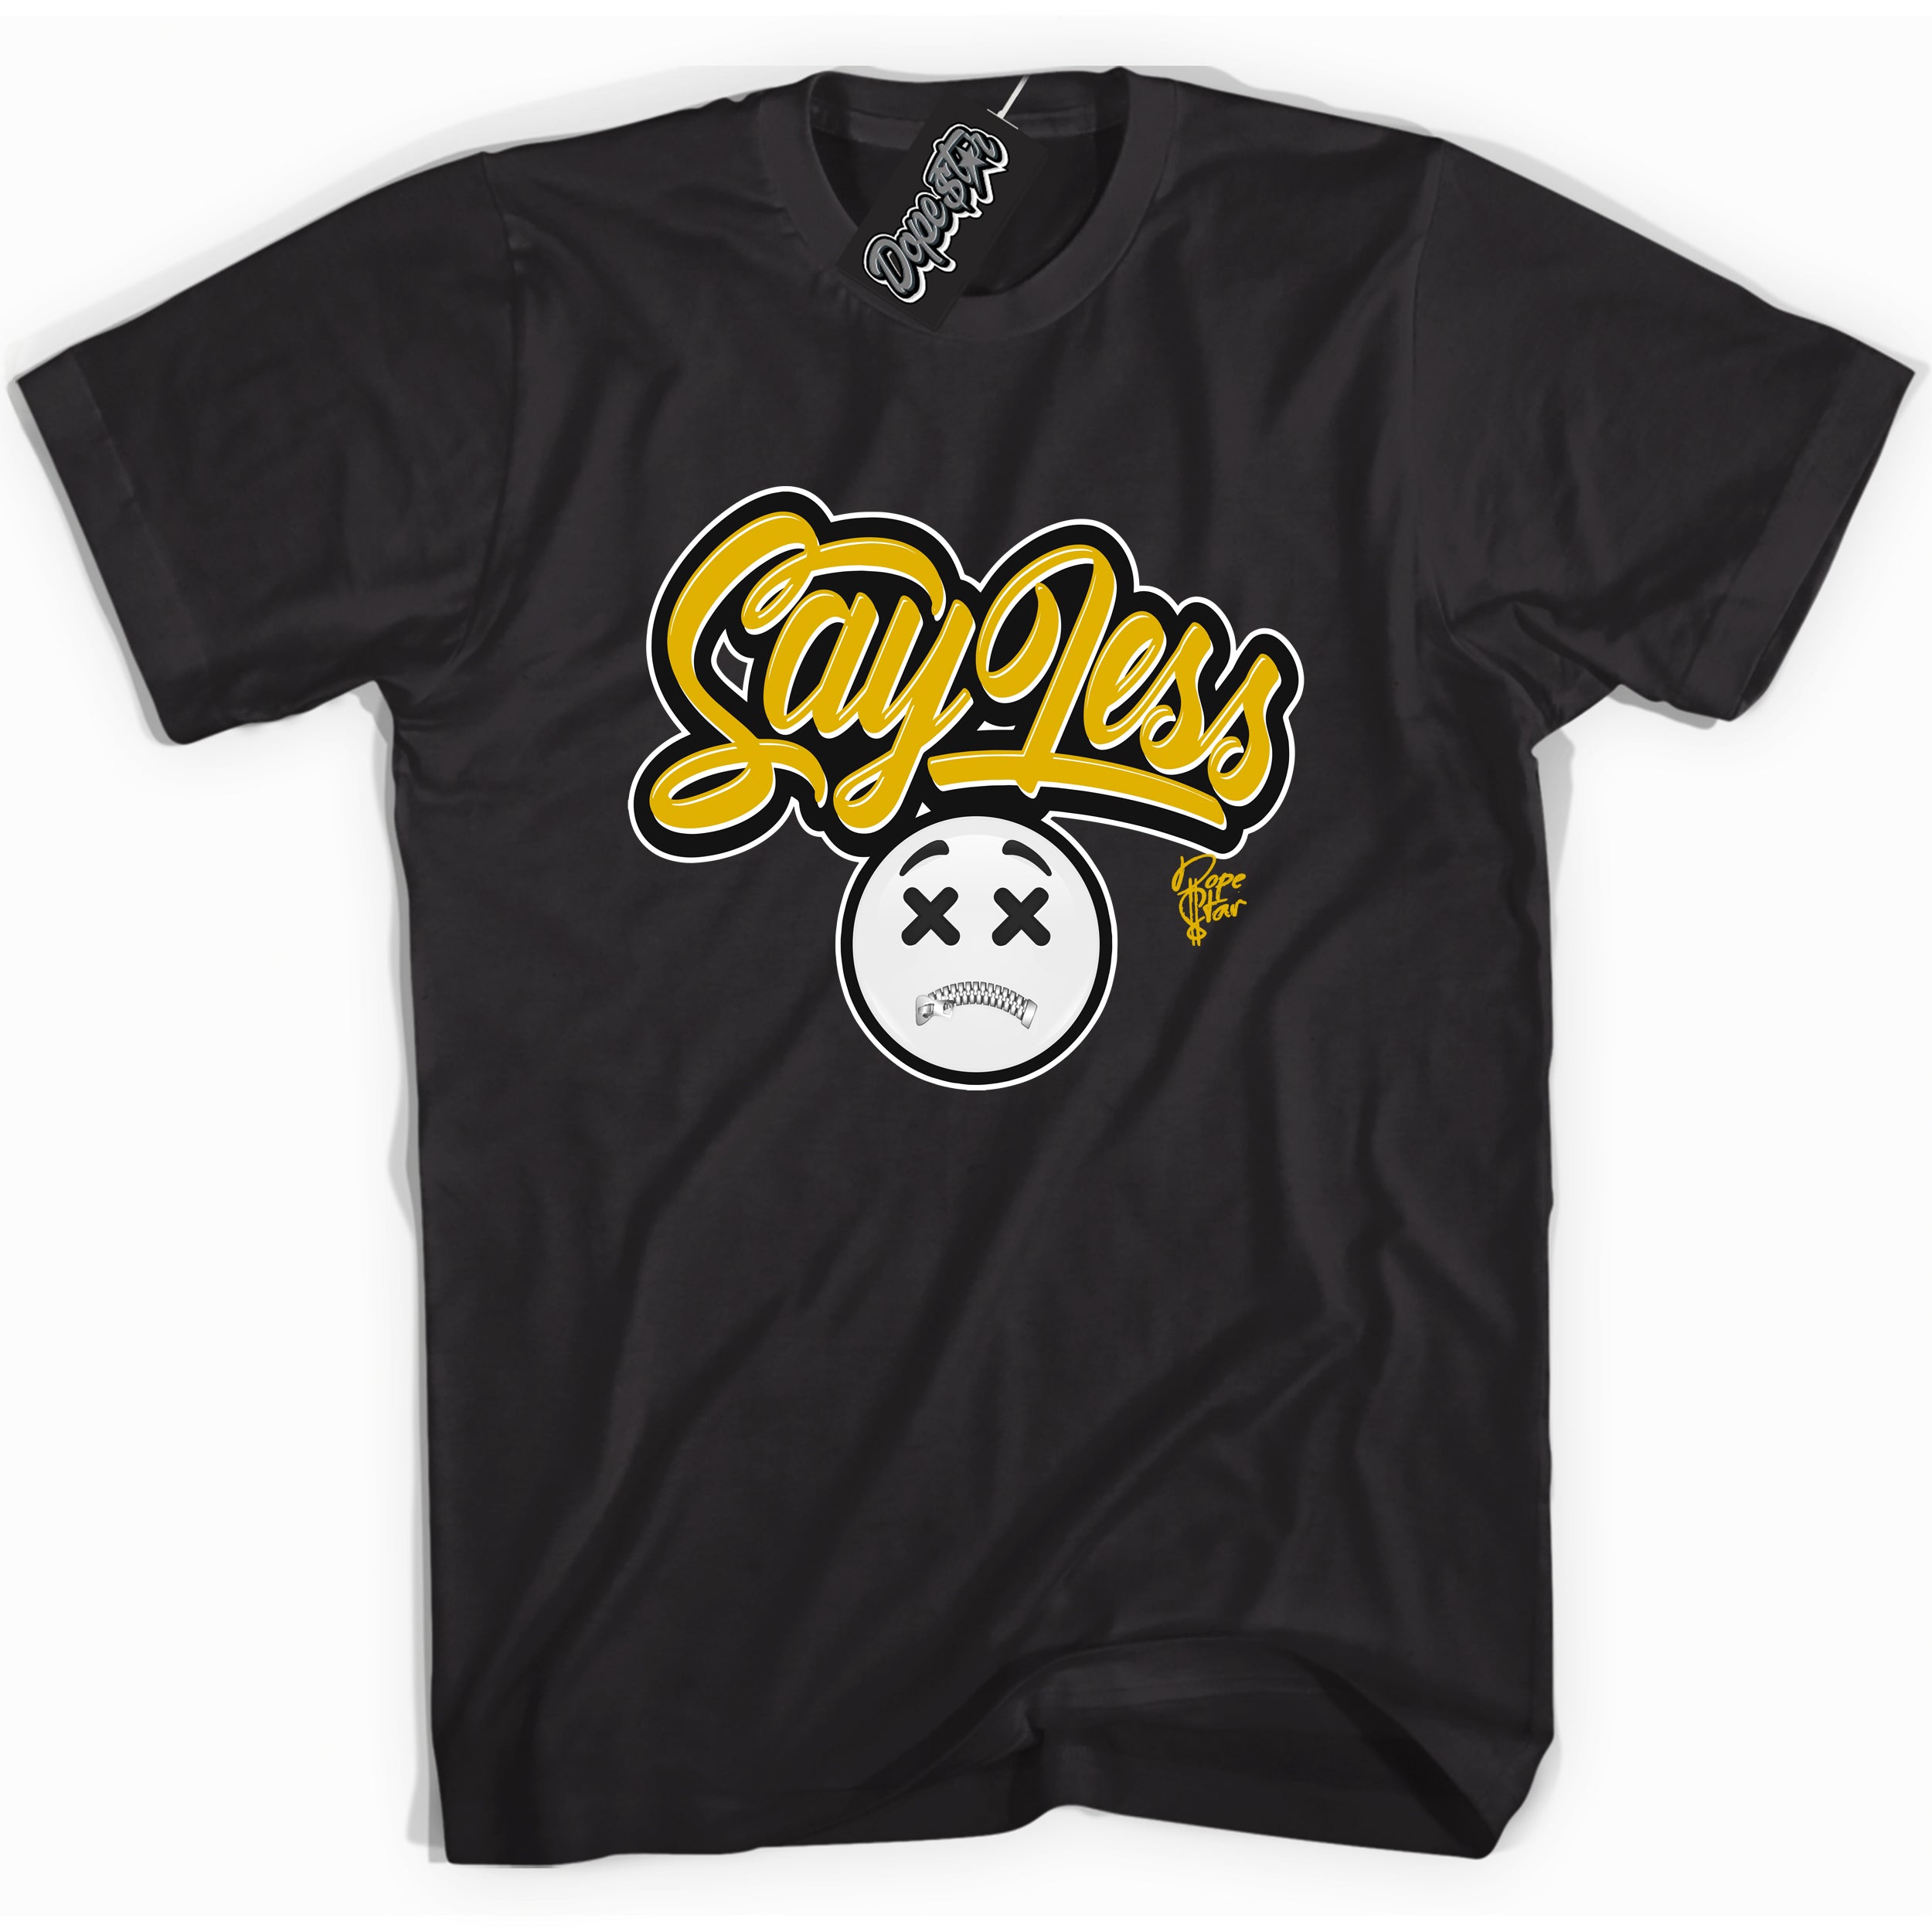 Cool black Shirt with “ Say Less” design that perfectly matches Yellow Ochre 6s Sneakers.